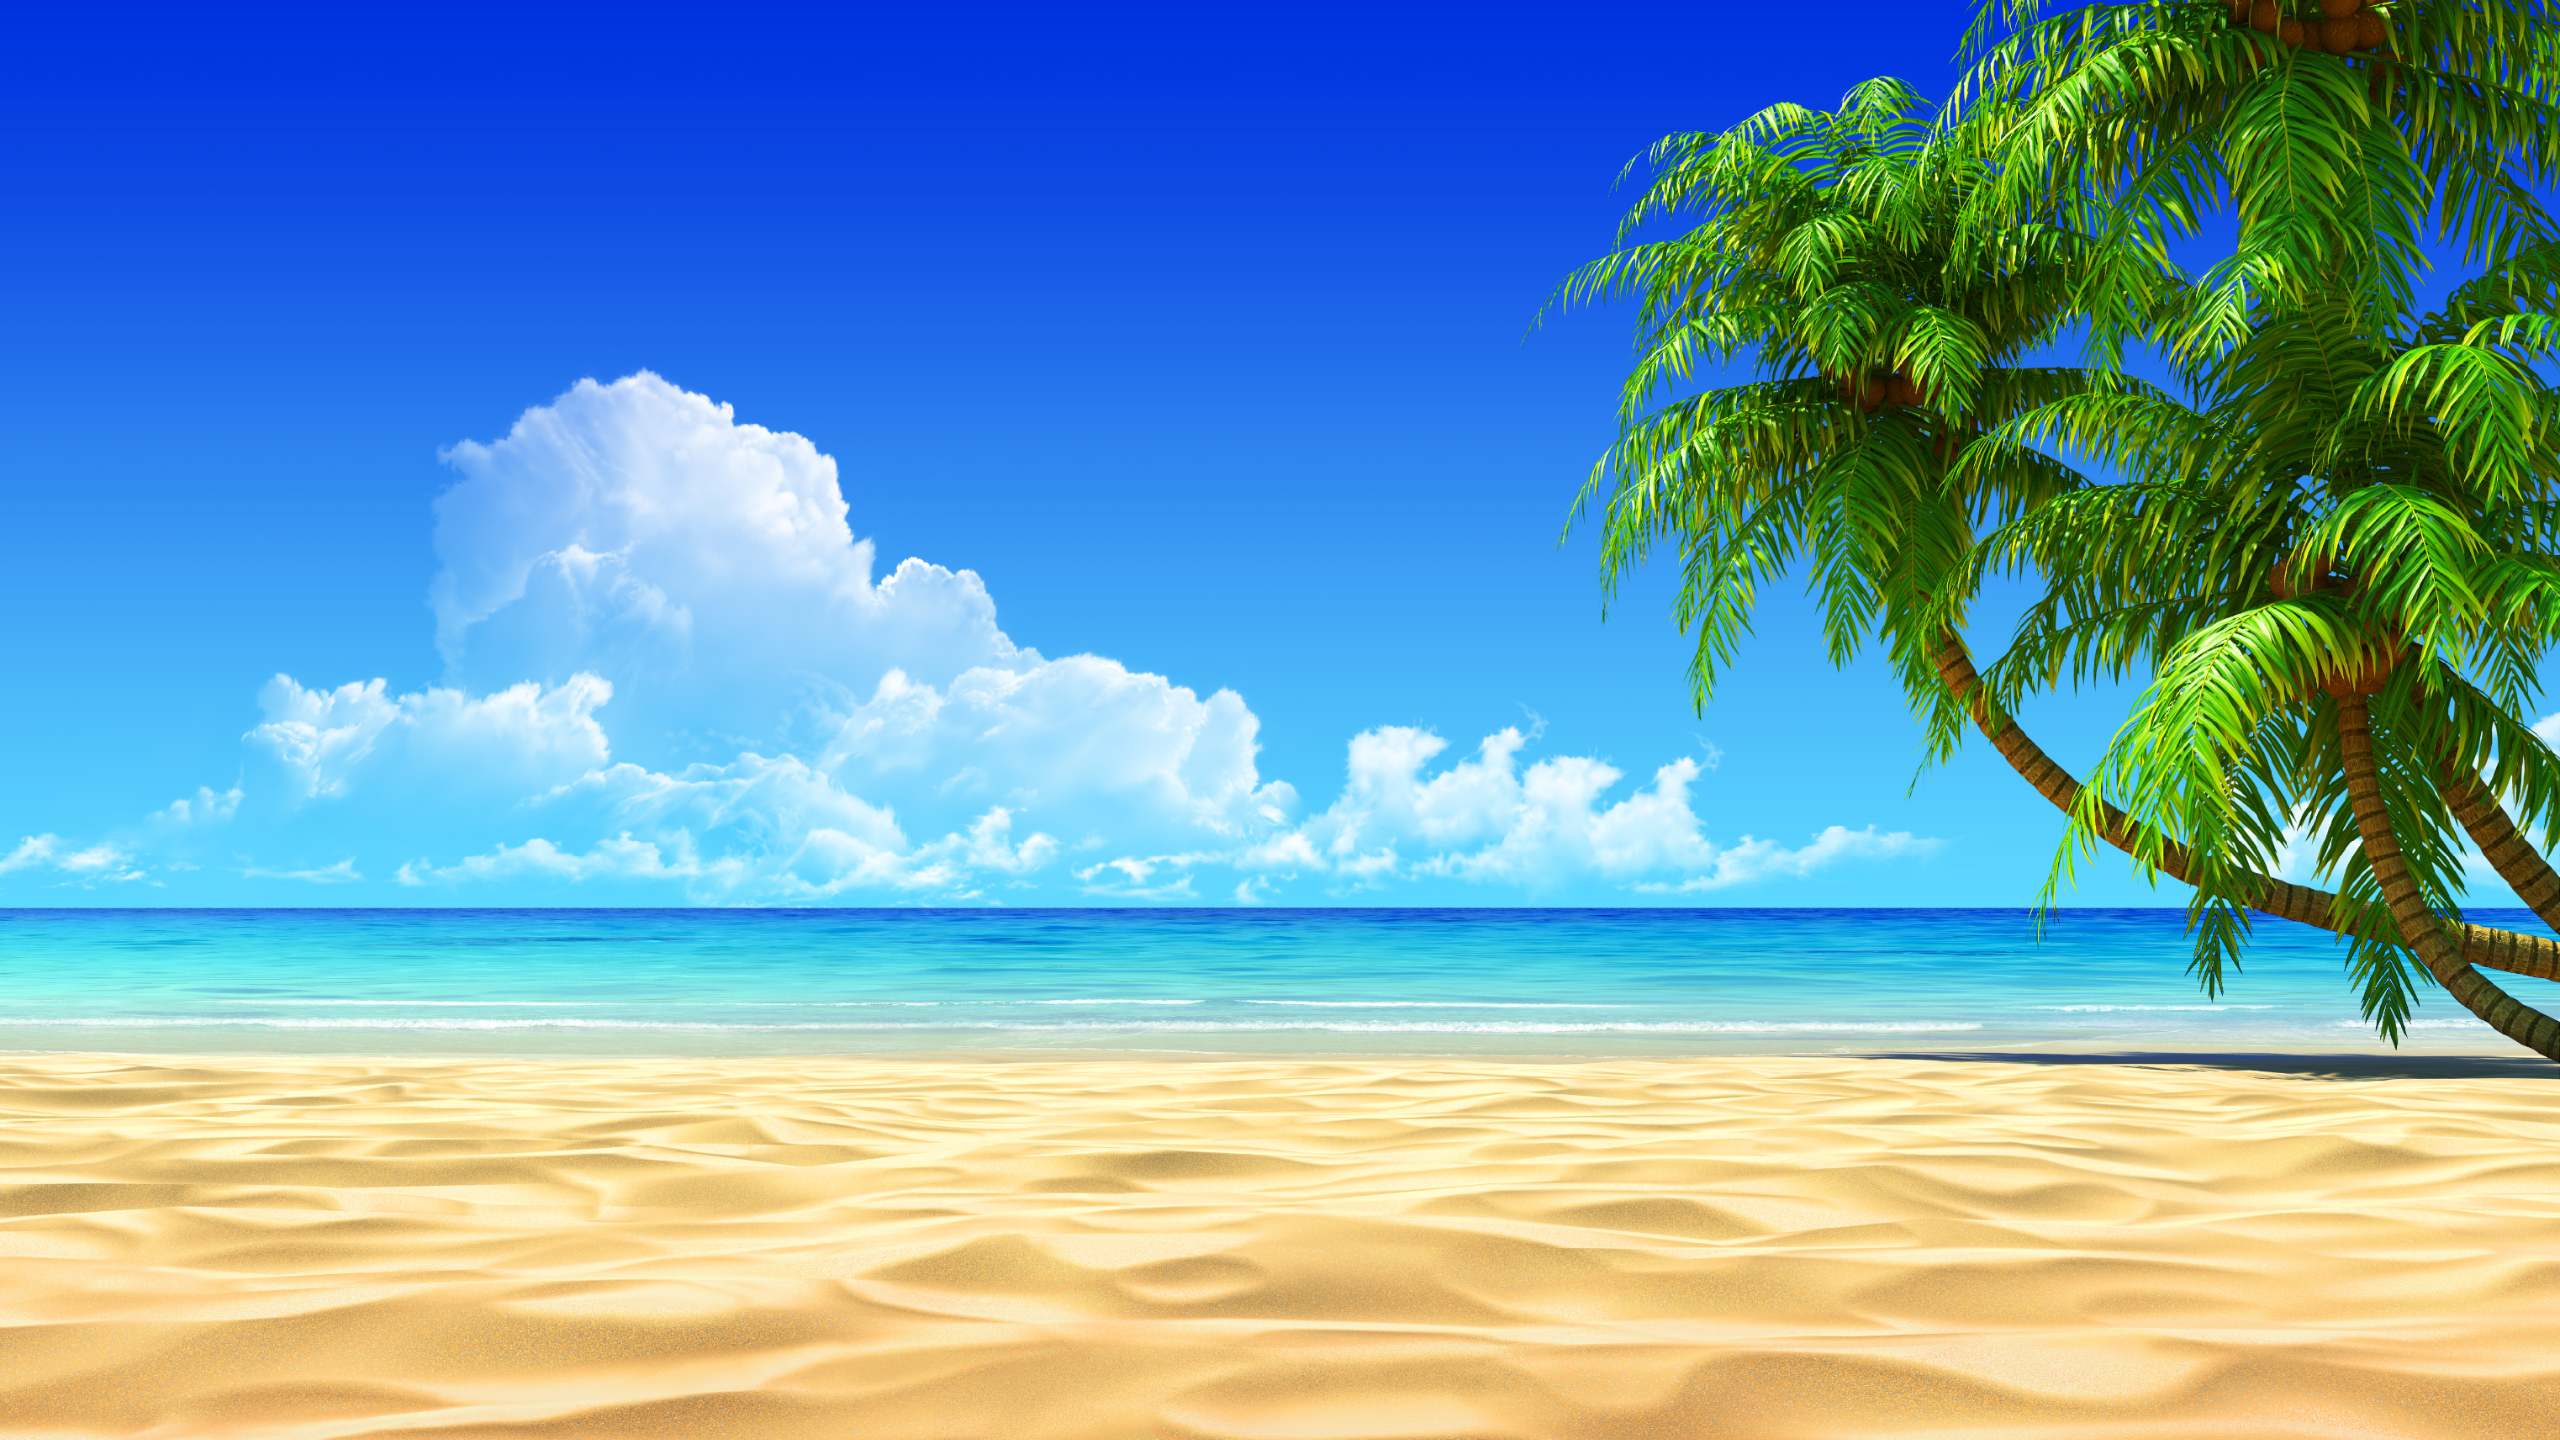 Beach Background images hd free download